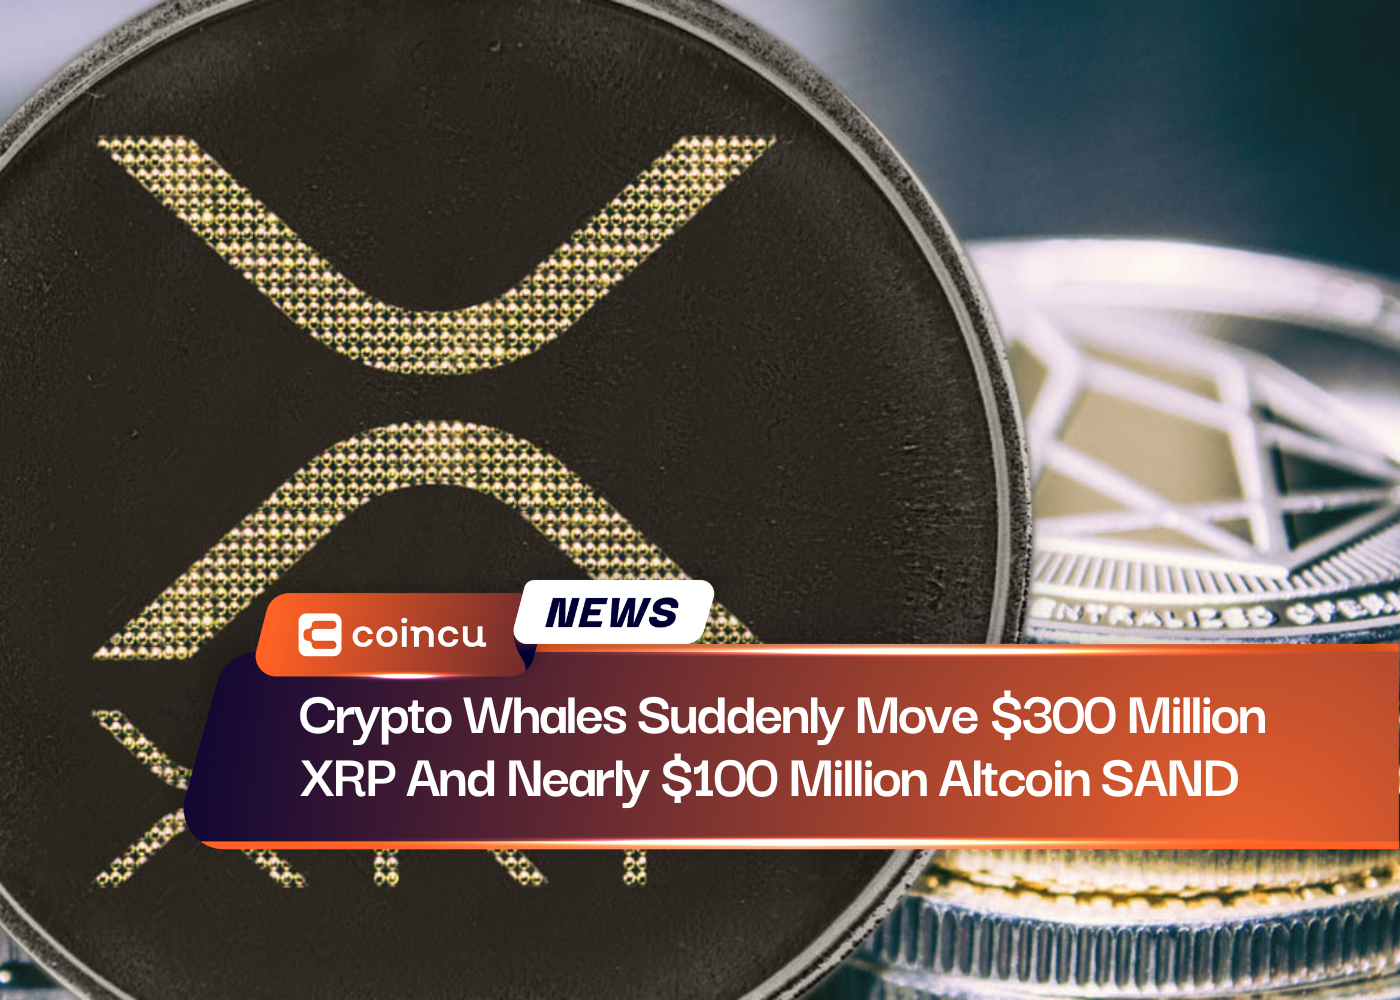 Crypto Whales Suddenly Move $300 Million XRP And Nearly $100 Million Altcoin SAND